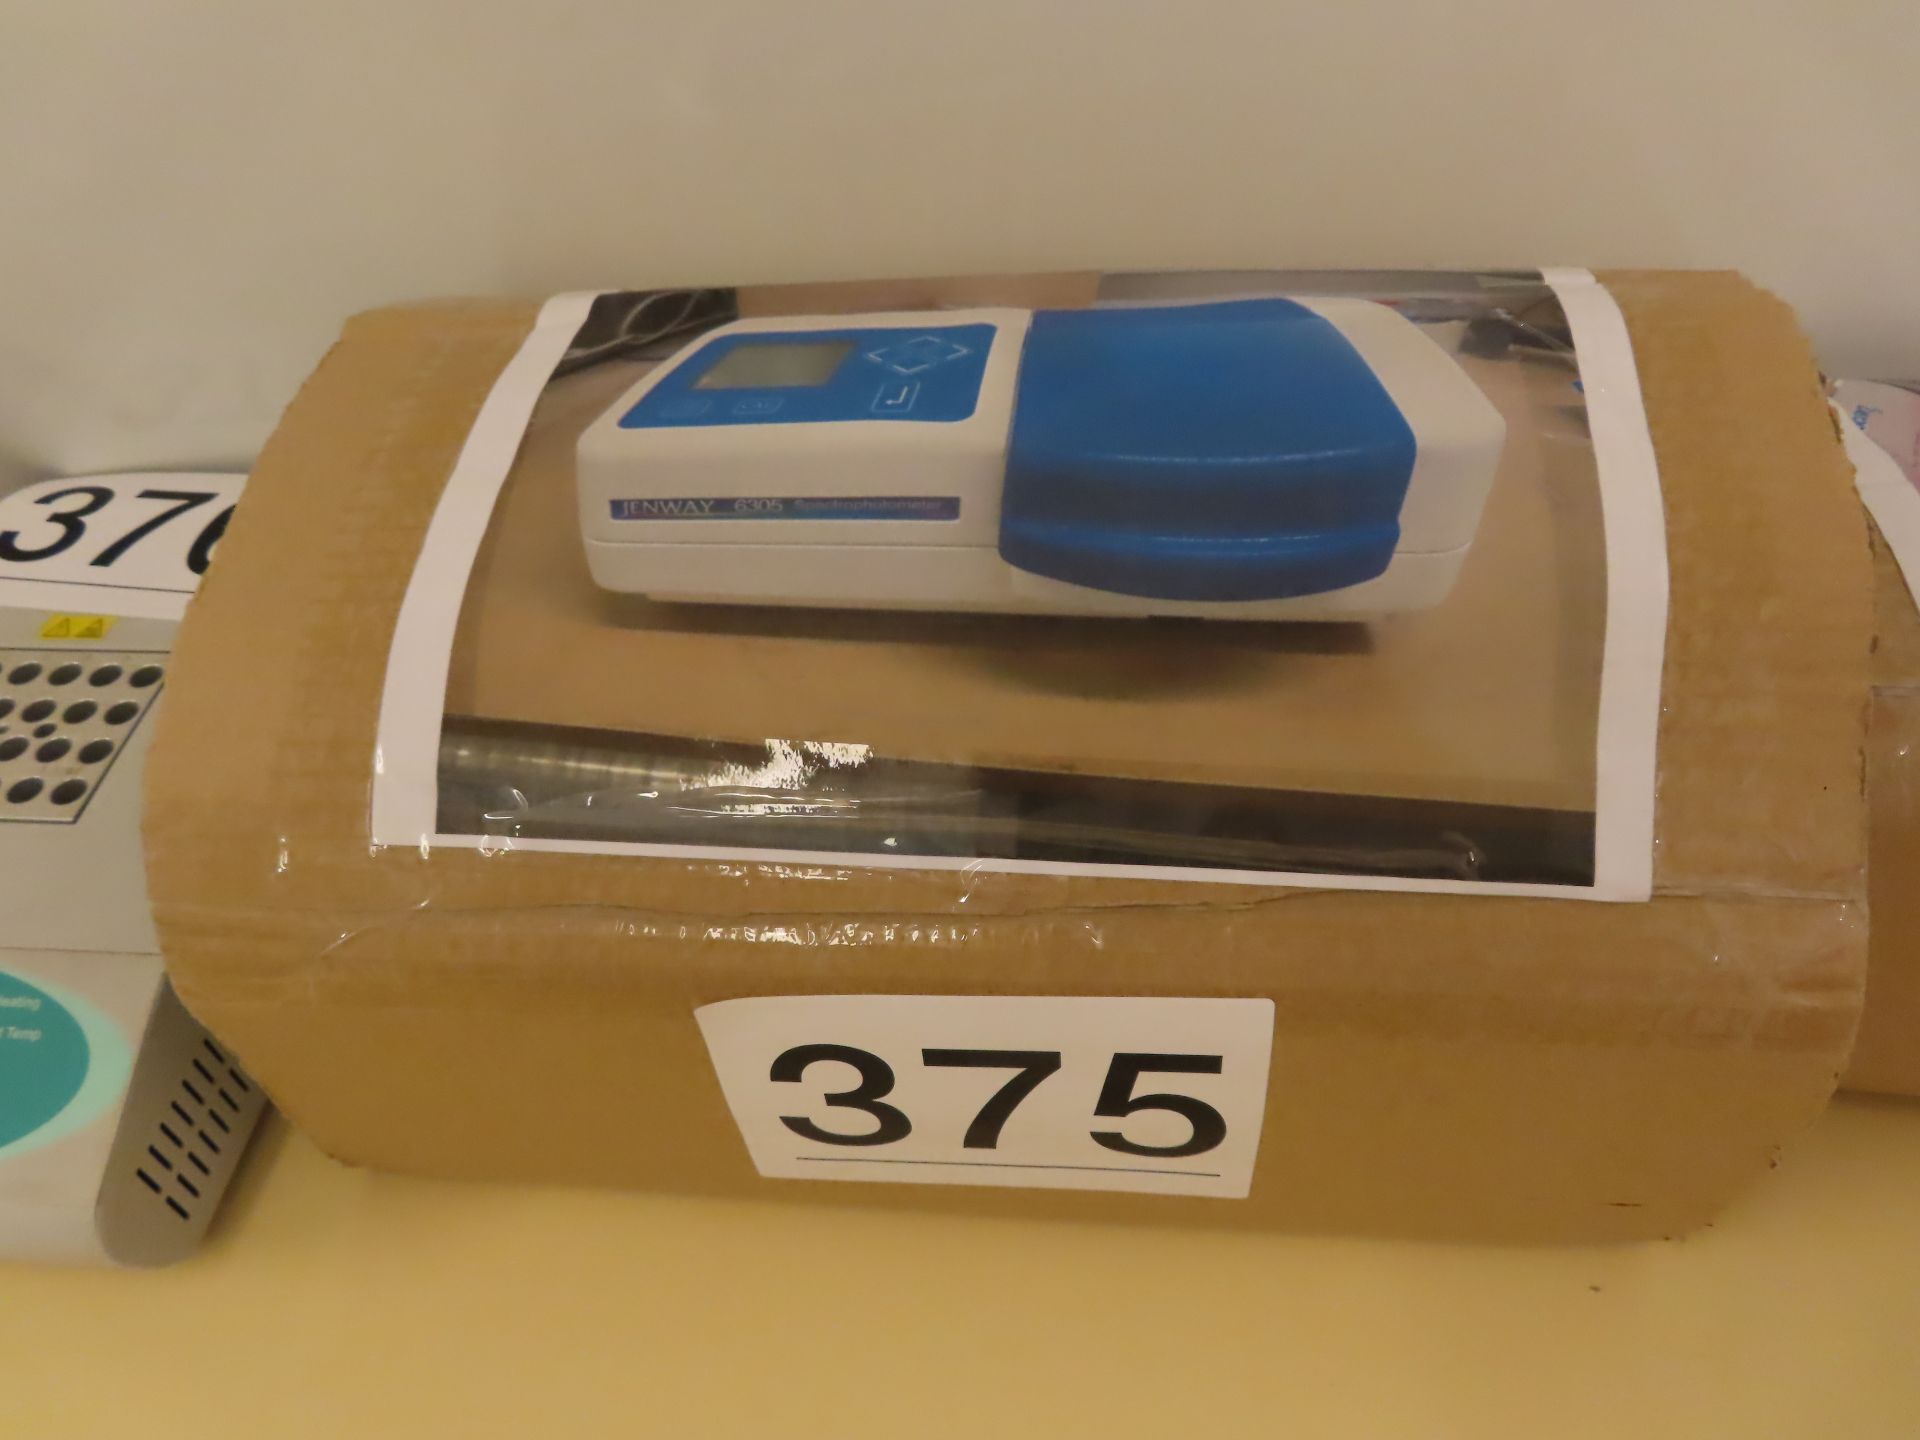 BRAND NEW JENWAY 6305 SPECTROPHOTOMETER.